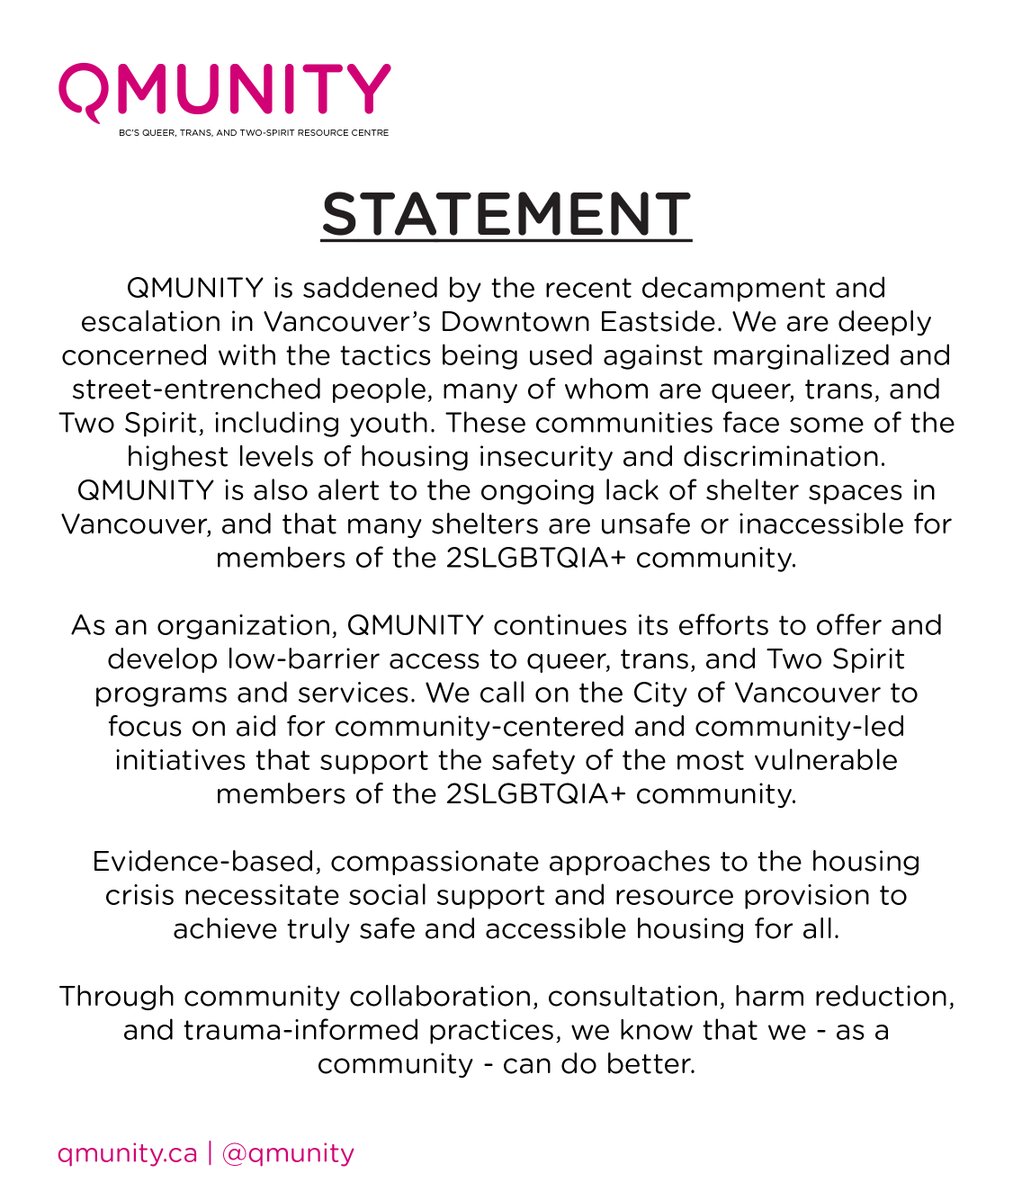 QMUNITY's statement addressing the displacement that's occuring in DTES. For further comments please contact michael.robach@qmunity.ca